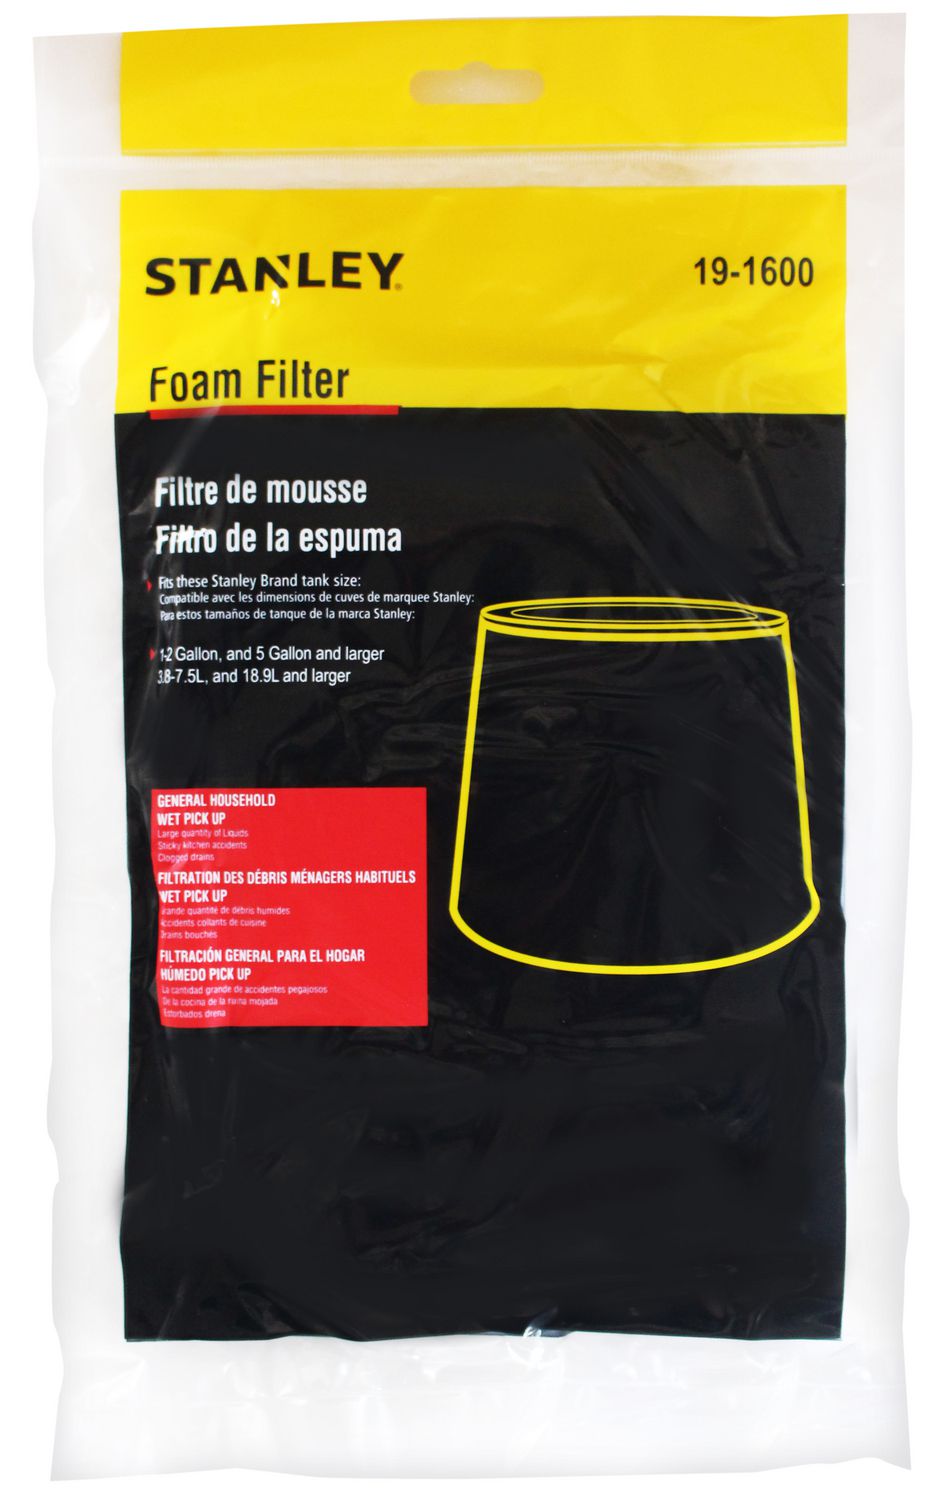 Stanley Foam Filter, Fits these Stanley brand tank sizes: 1-2